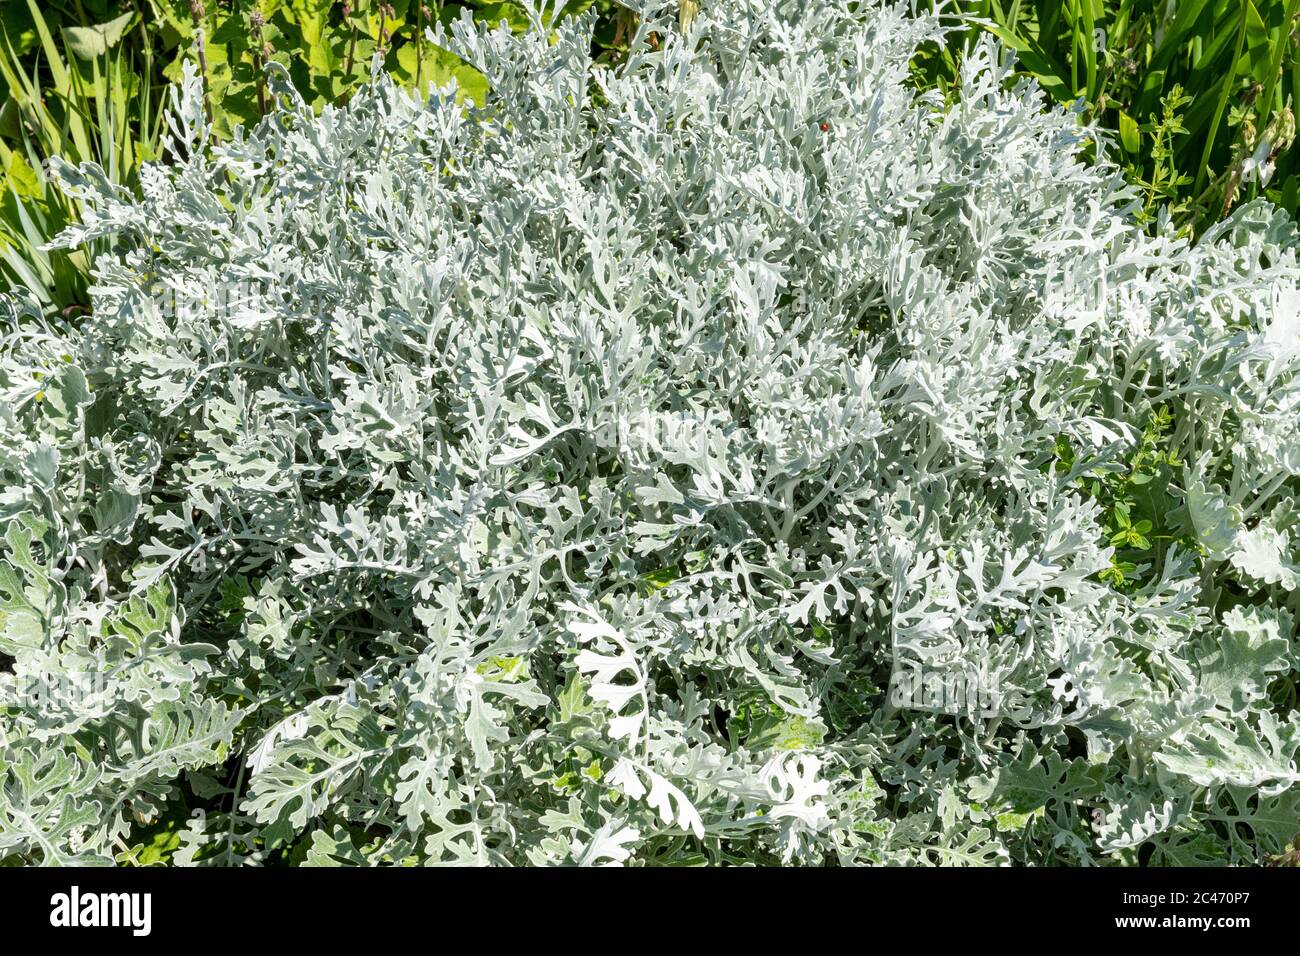 Cineraria plant with silver foliage in an English garden during June, UK Stock Photo